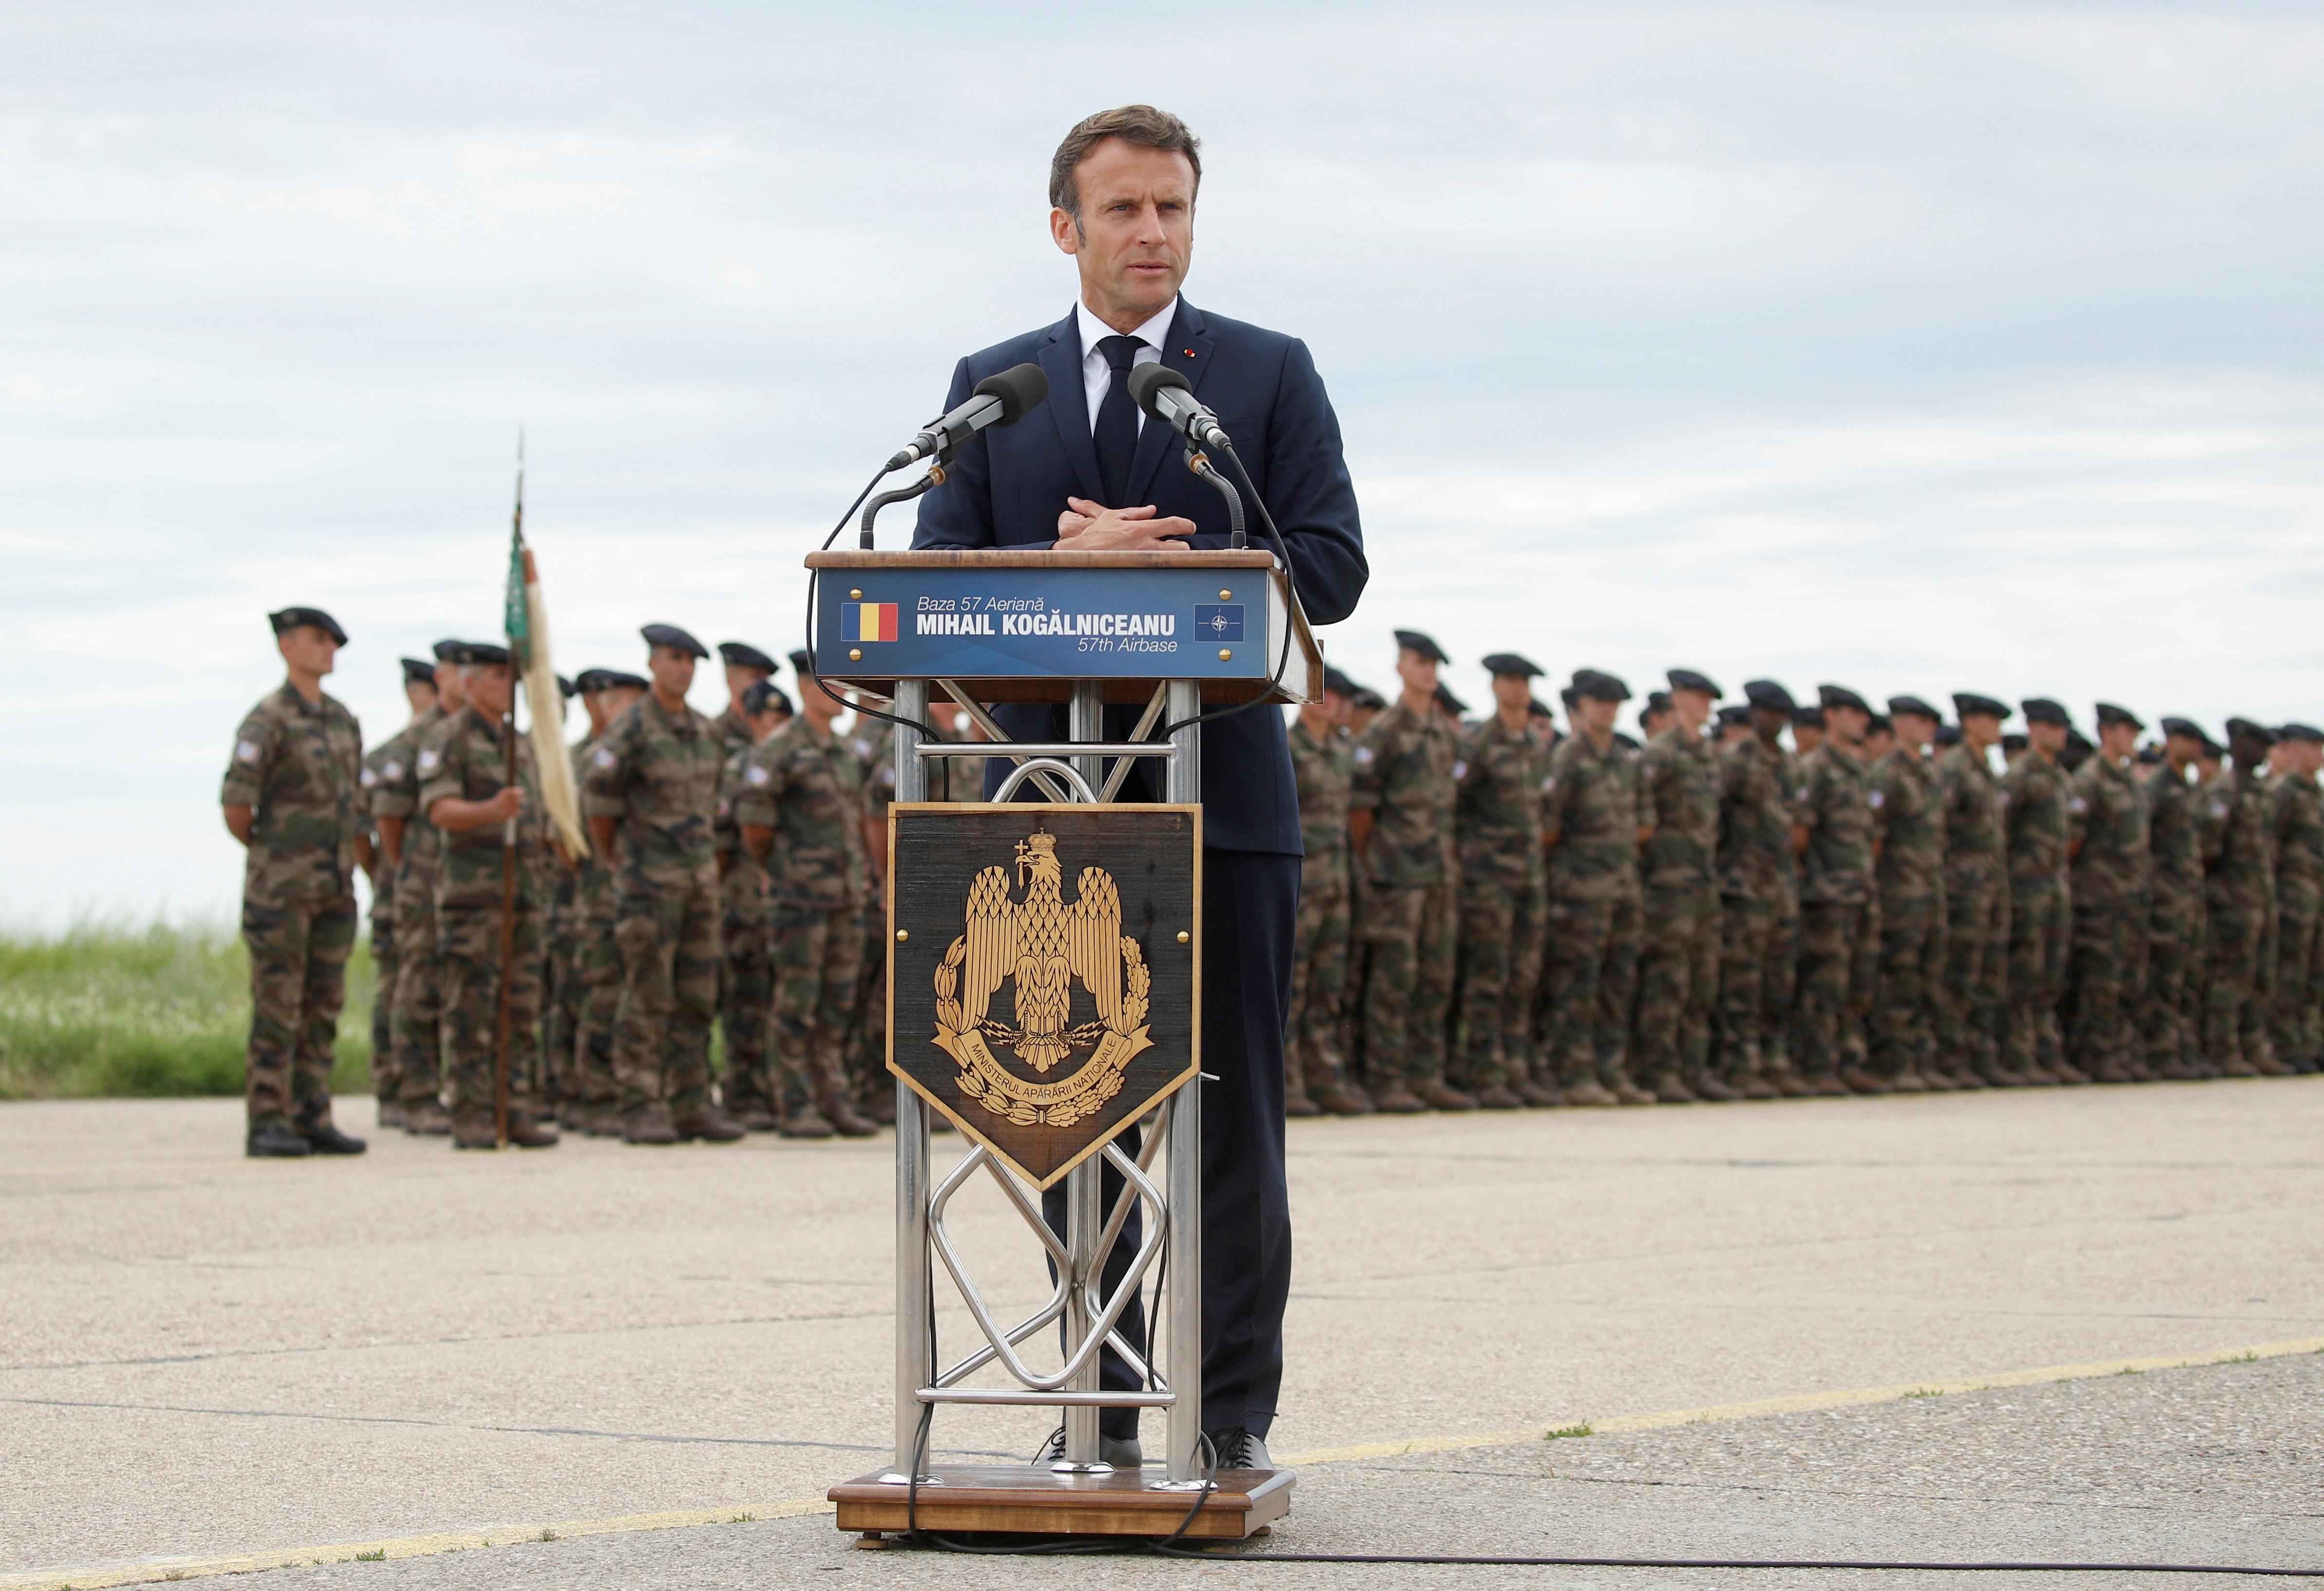 French President Macron meets Romanian counterpart Iohannis at NATO base in Romania